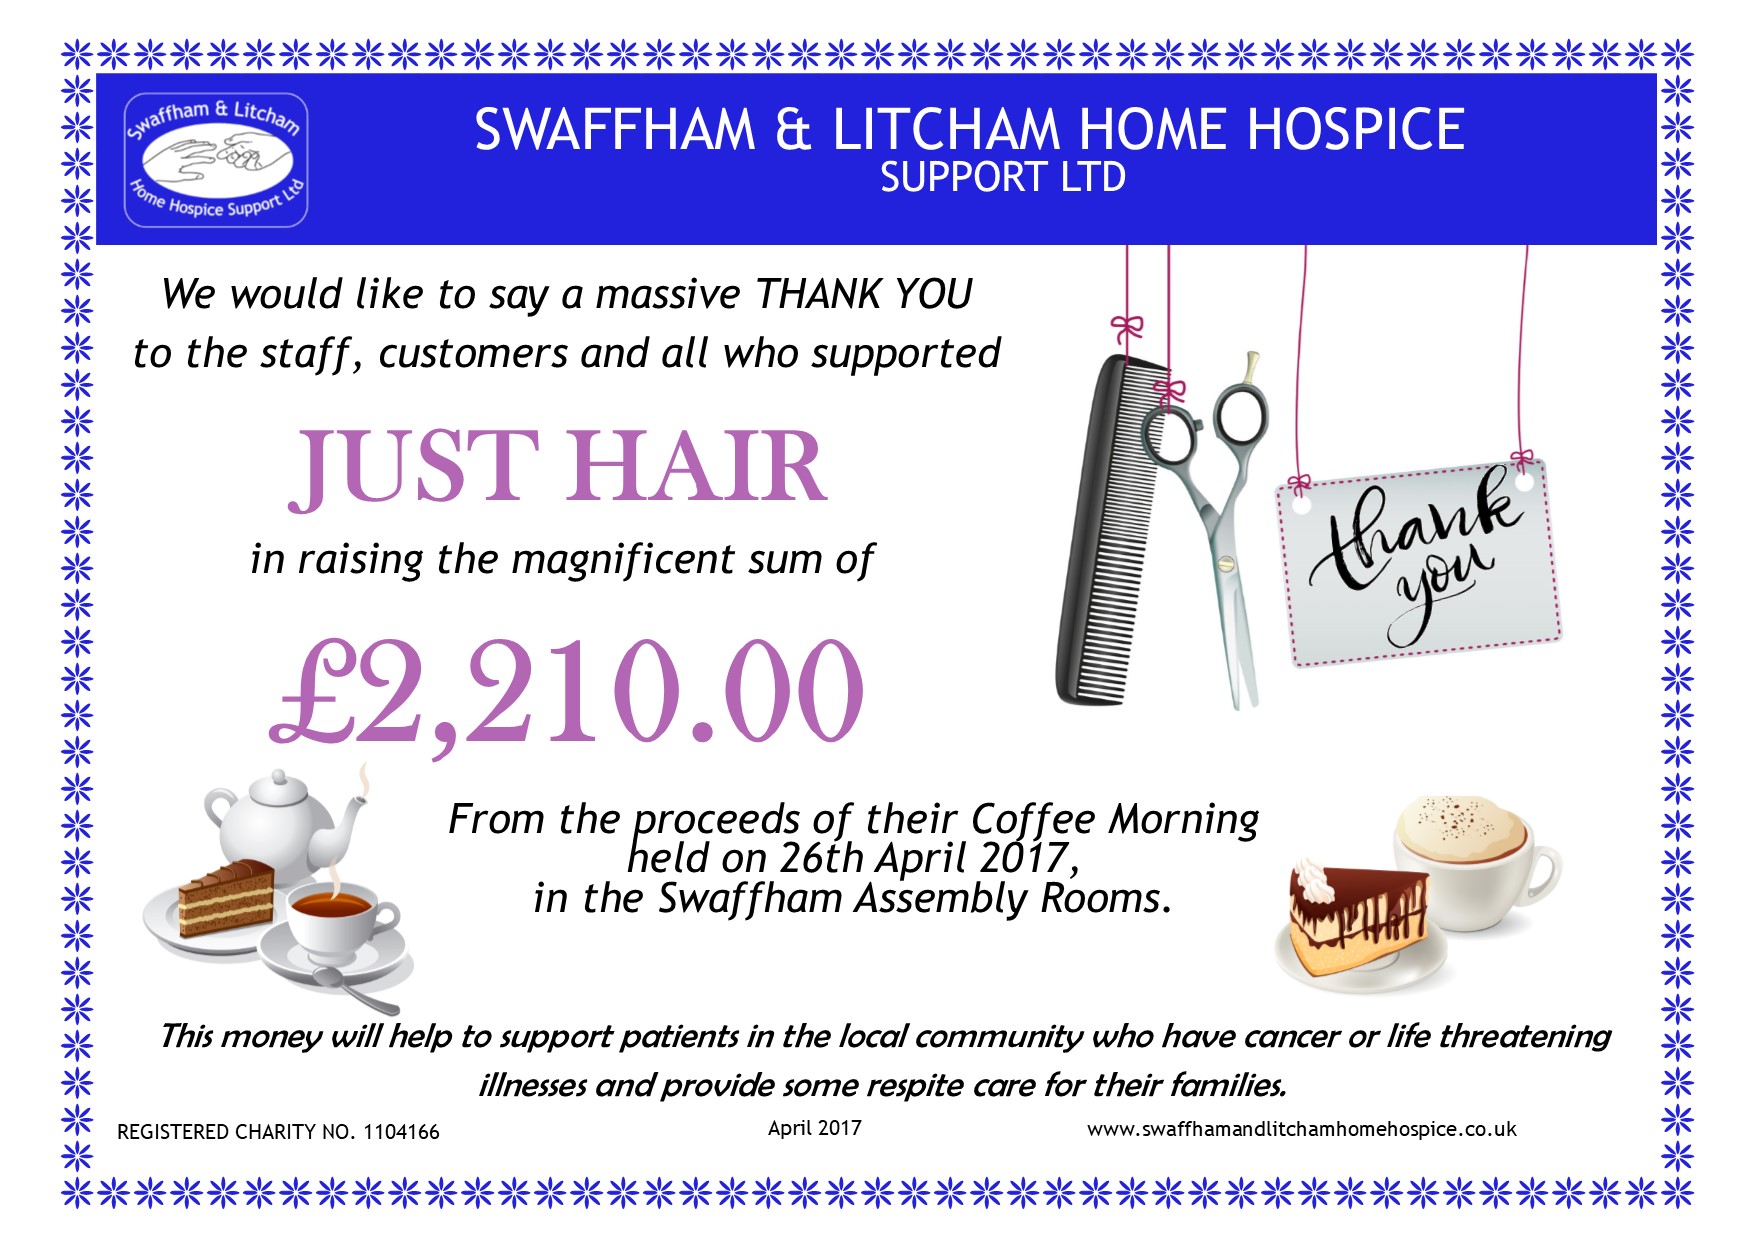 Money raised by Just Hair at their Coffee Morning, April 2017